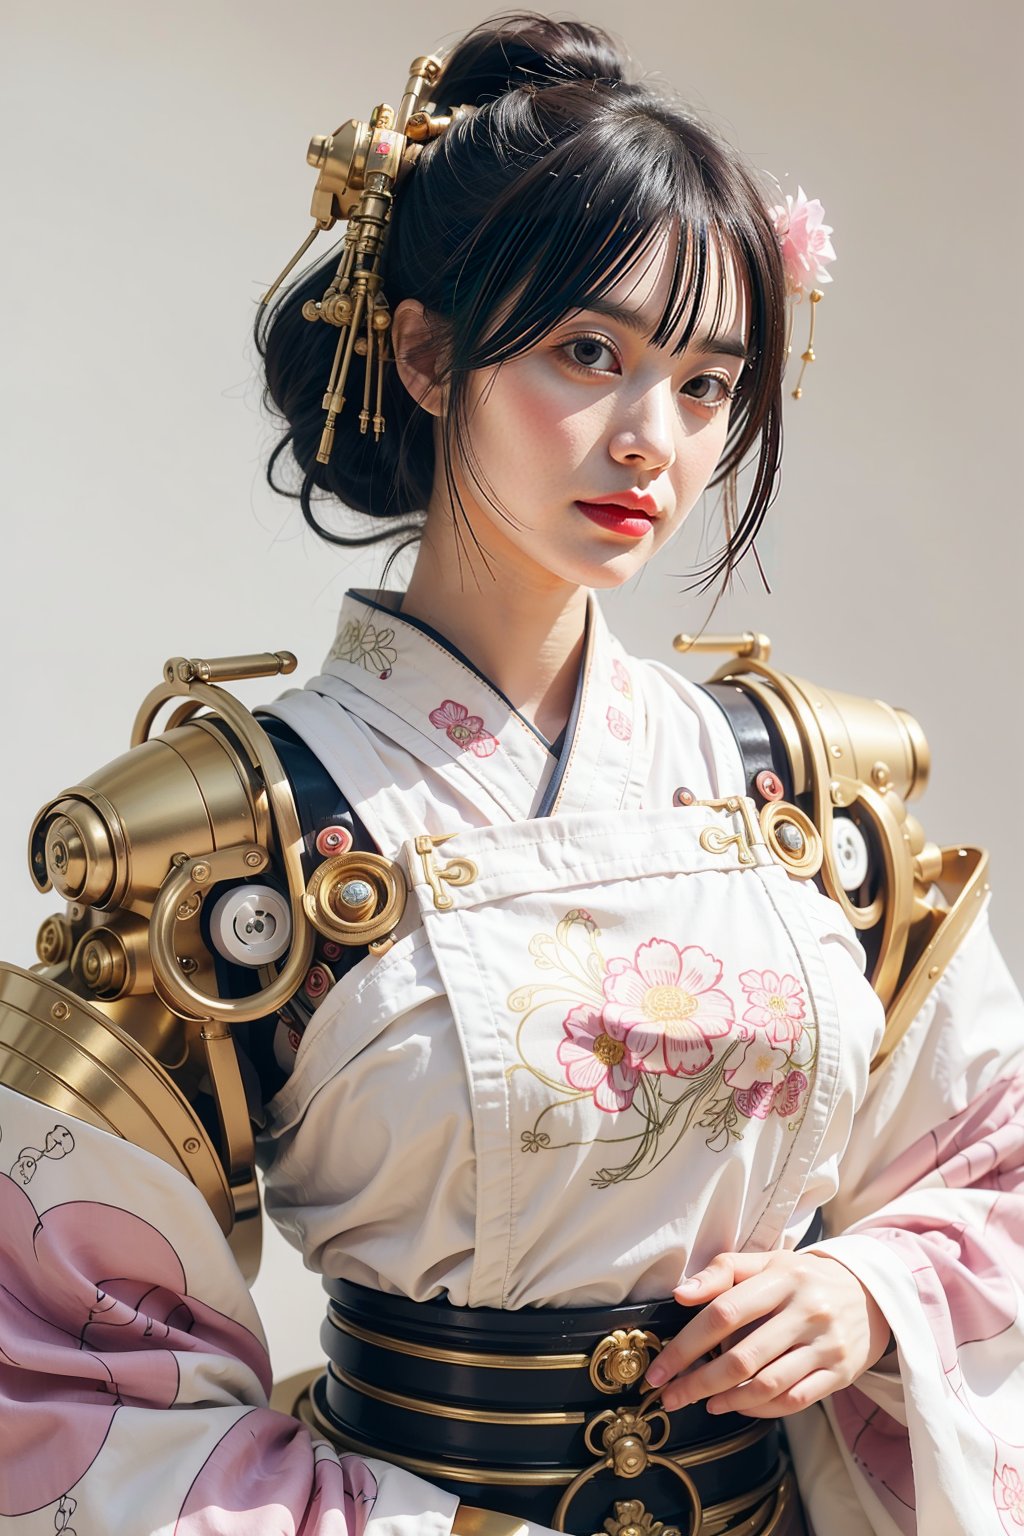 visually striking blend of traditional Japanese aesthetics with futuristic elements. The central figure is a golden robot with a humanoid appearance, specifically designed to resemble a female figure wearing a kimono. The robot's head is adorned with a traditional Japanese hairstyle, often associated with a geisha, including a shimada-style bun and kanzashi hairpins.

The robot's face is featureless and smooth, with a pale pink hue that matches the color scheme of the kimono. The neck reveals golden mechanical components, suggesting advanced robotics technology. The kimono itself is beautifully detailed, with patterns of flowers that echo the surrounding blooms, and it includes shades of pink, white, and purple, with black and dark pink accents on the collar and edges.

The background is filled with a dense array of pink flowers, likely chrysanthemums, which create a harmonious and lush backdrop that complements the robot's attire. The overall effect is a striking juxtaposition of the organic beauty of traditional Japanese floral motifs with the sleek, modern lines of robotic design. The image seems to explore themes of tradition versus modernity, nature versus technology, and the evolving definitions of beauty and identity,futubot,davincitech